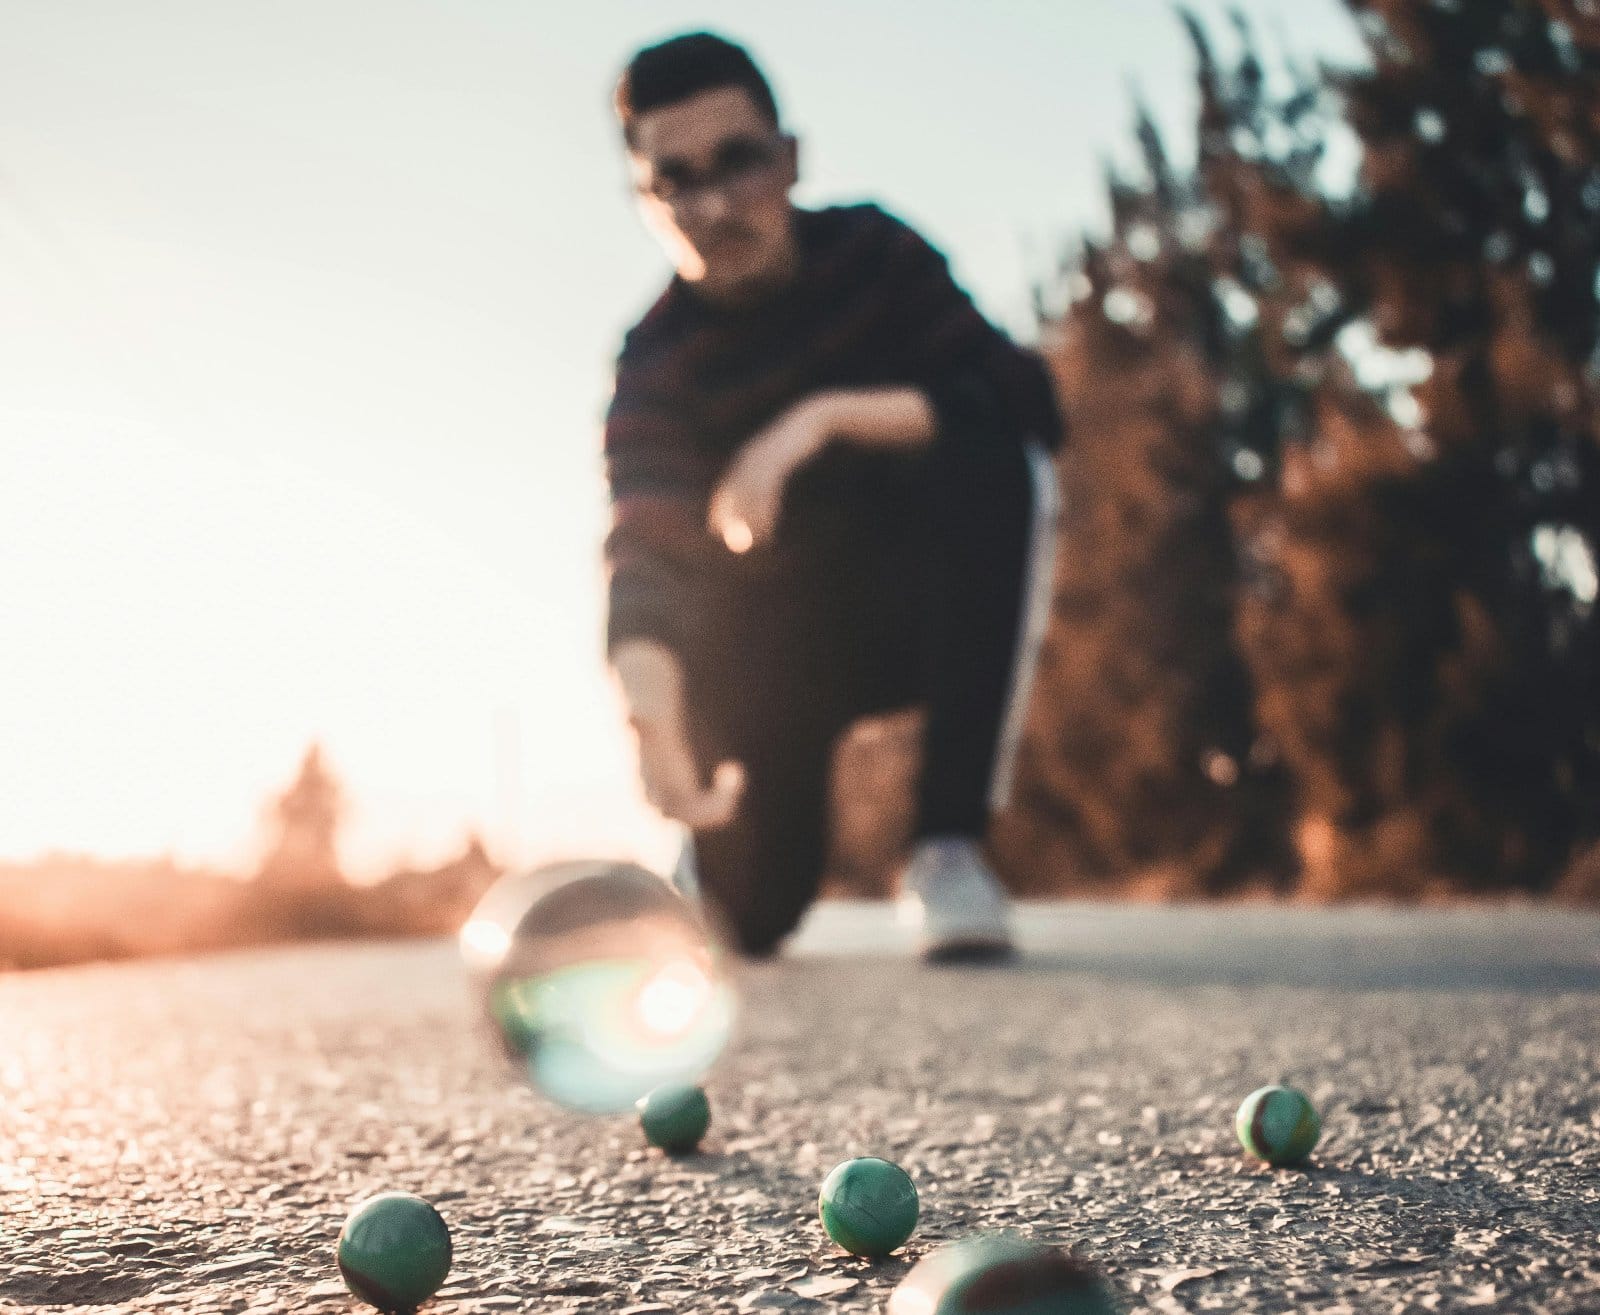 Image Credit: Pexel / Nadjib ali Bachir <p><span>Playing marbles involves strategy, skill, and a bit of physics, providing a fun and educational way to discuss concepts like force and motion. It’s also a great way to foster patience and fine motor skills.</span></p>